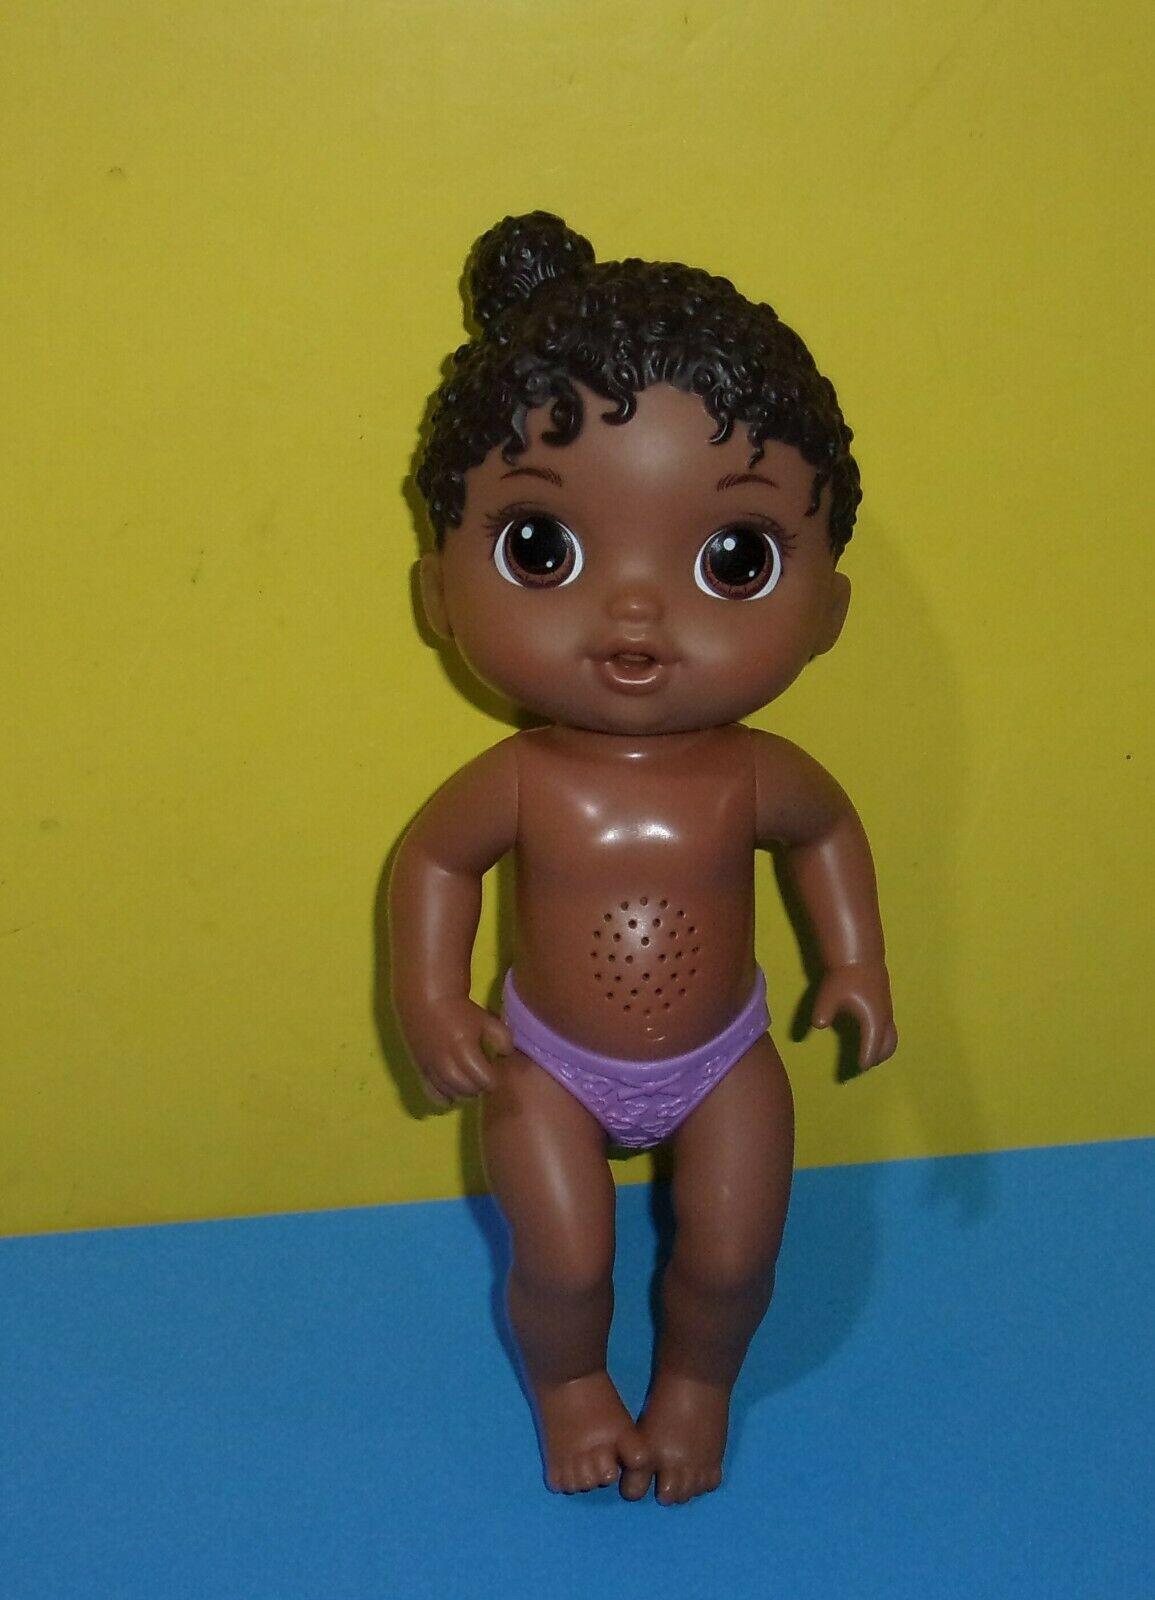 Baby Alive Baby Lil Sounds Interactive Black Hair Baby Doll for Girls & Boys .. 